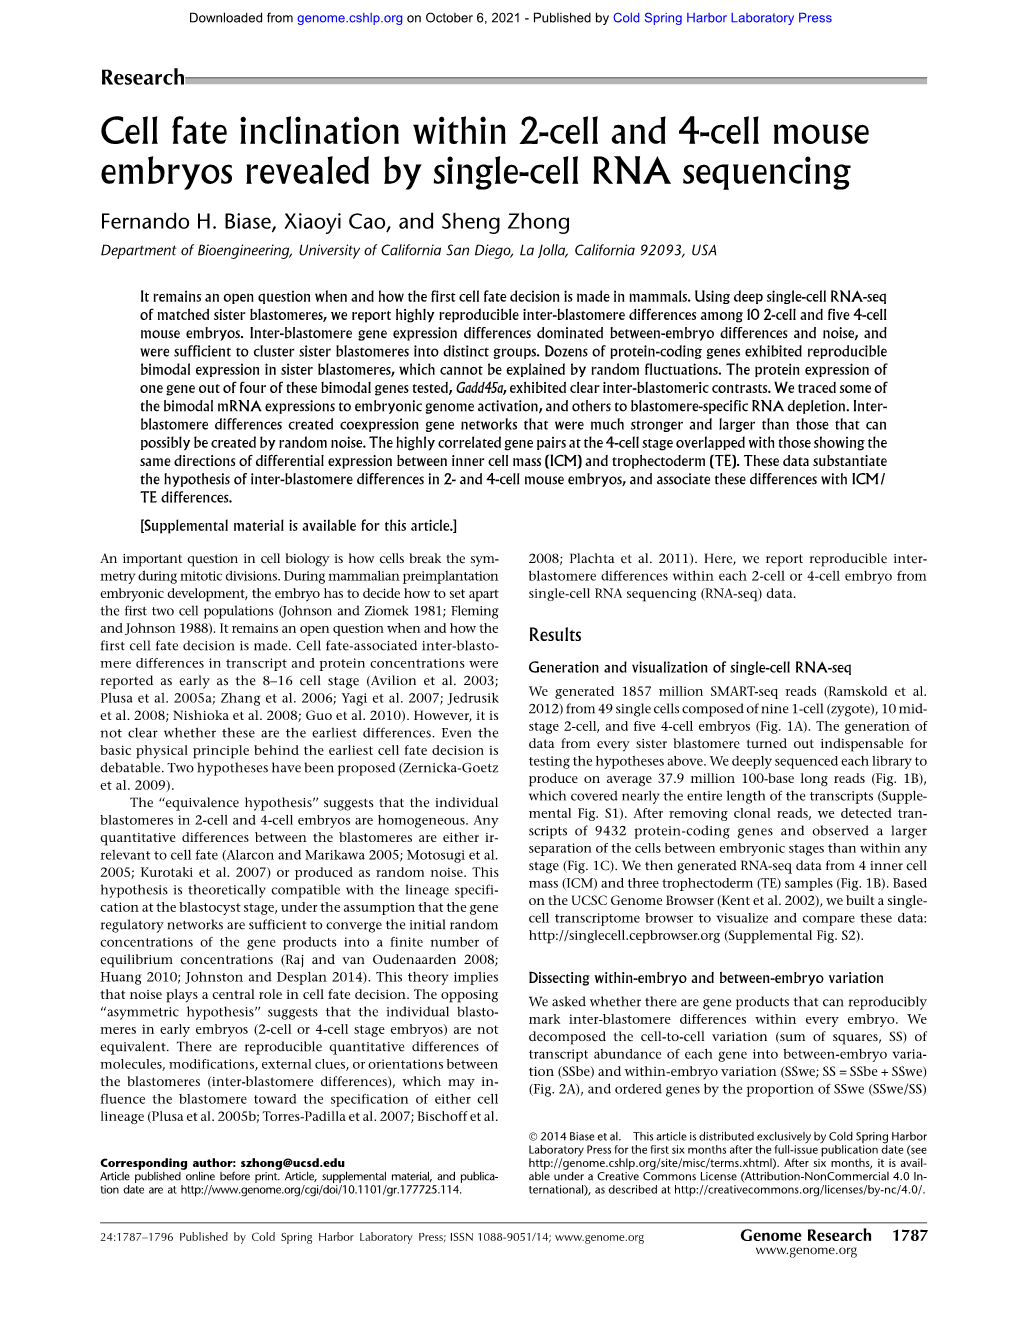 Cell Fate Inclination Within 2-Cell and 4-Cell Mouse Embryos Revealed by Single-Cell RNA Sequencing